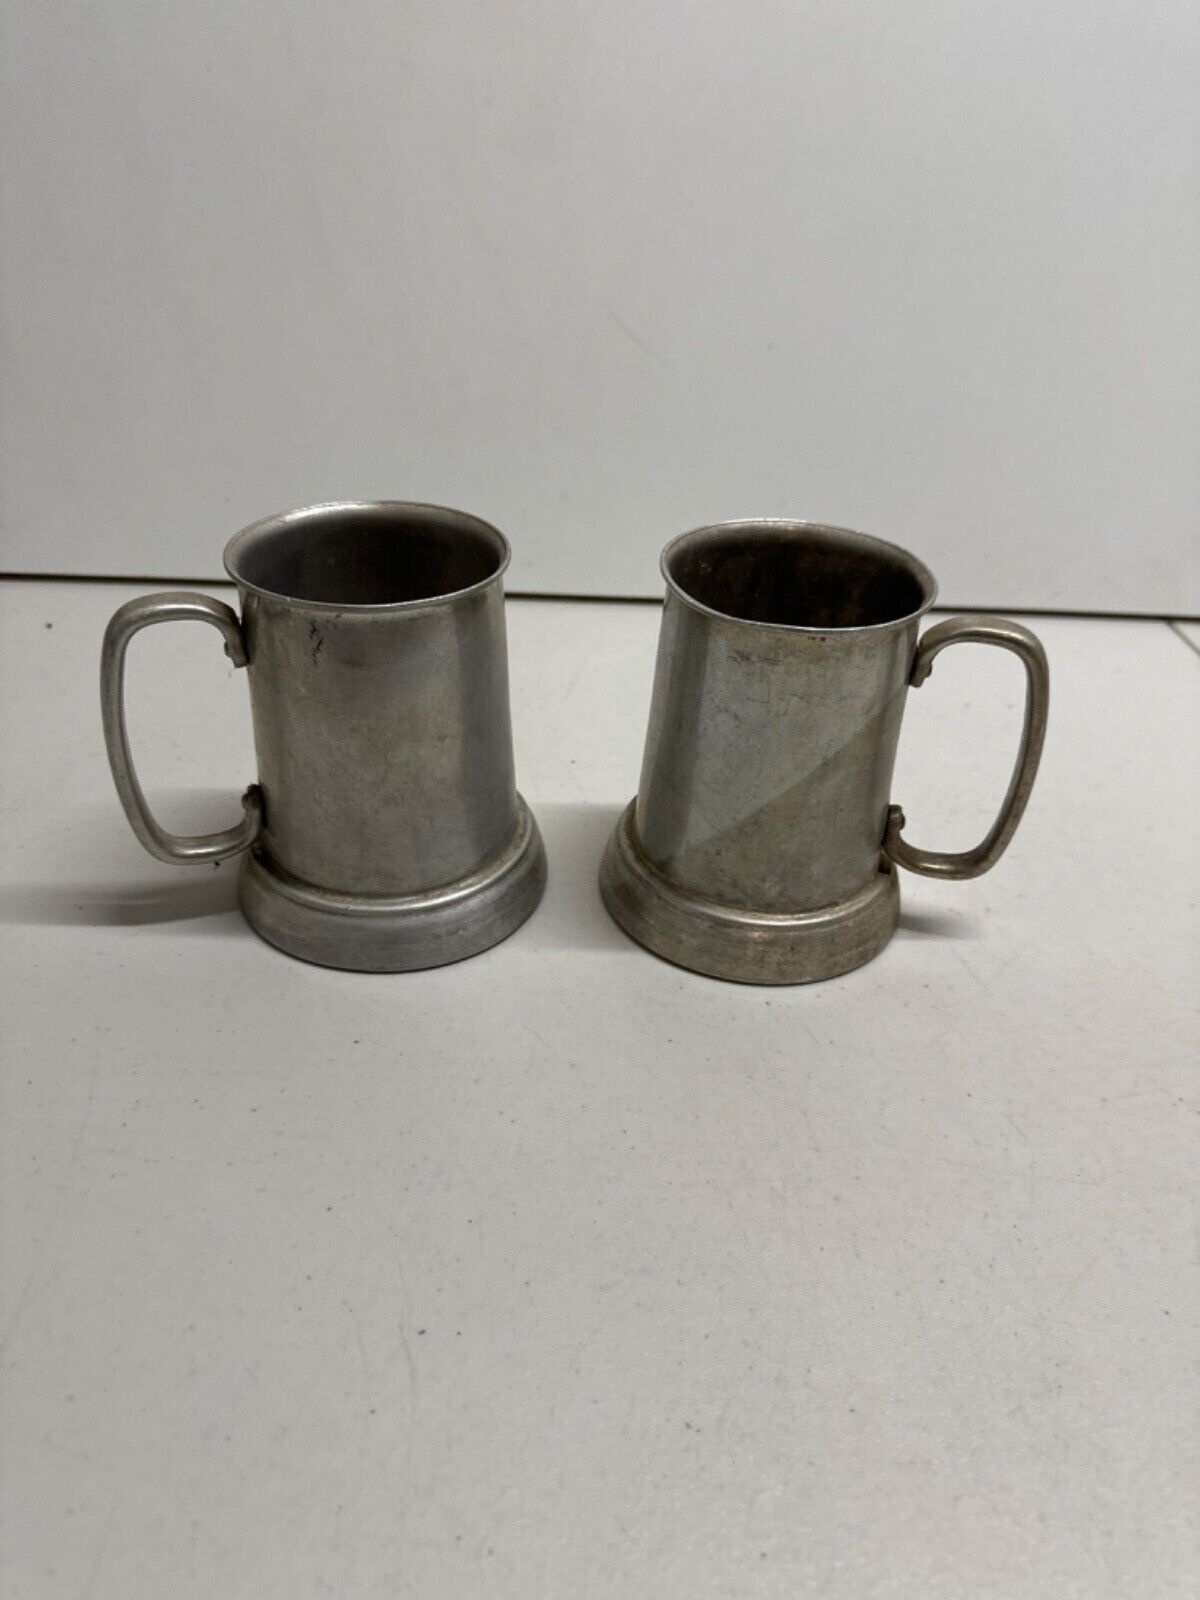 Vintage Mug pair of old aluminum mugs with clear bottom